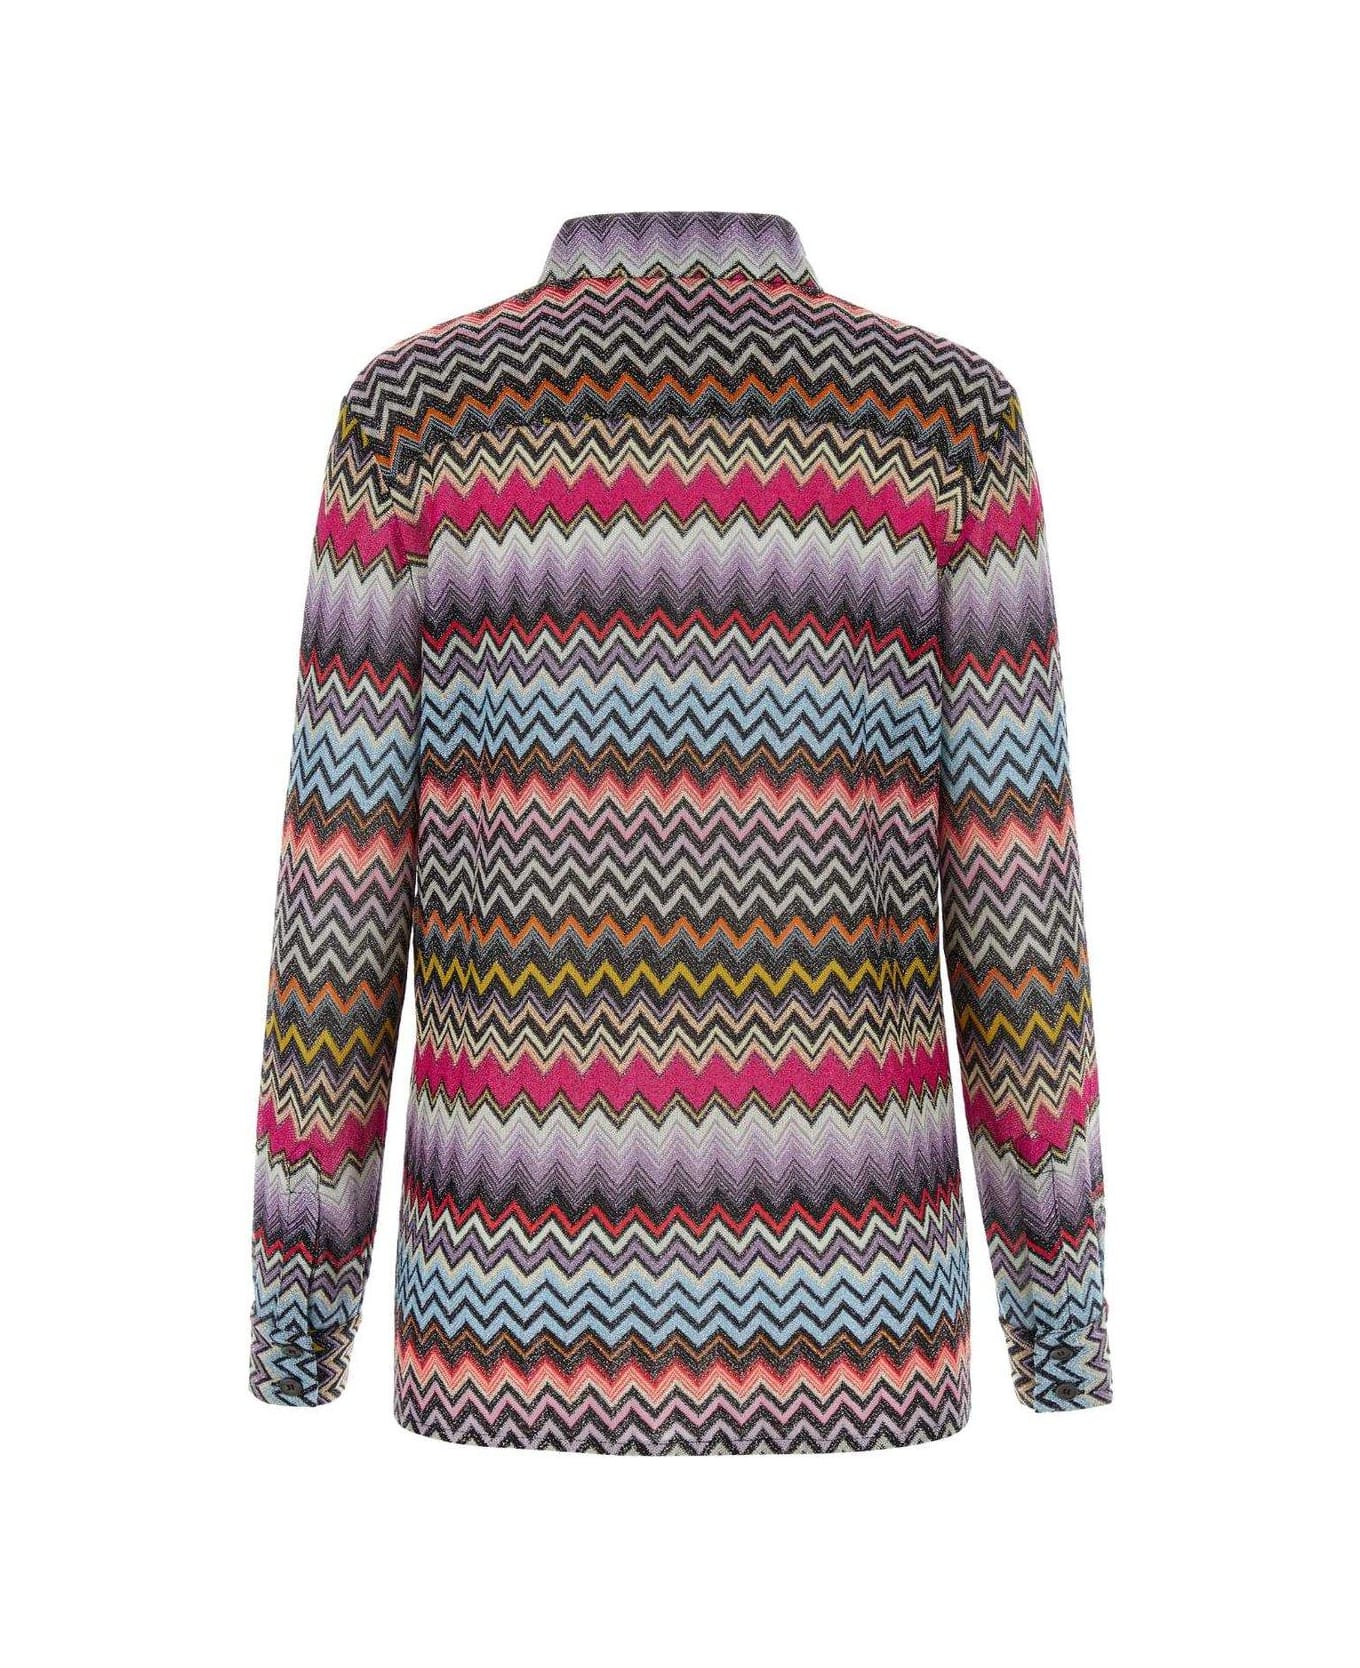 Missoni Patternede Embroidered Button-up Long-sleeved Shirt - MULTICOLOR BLACK BAS